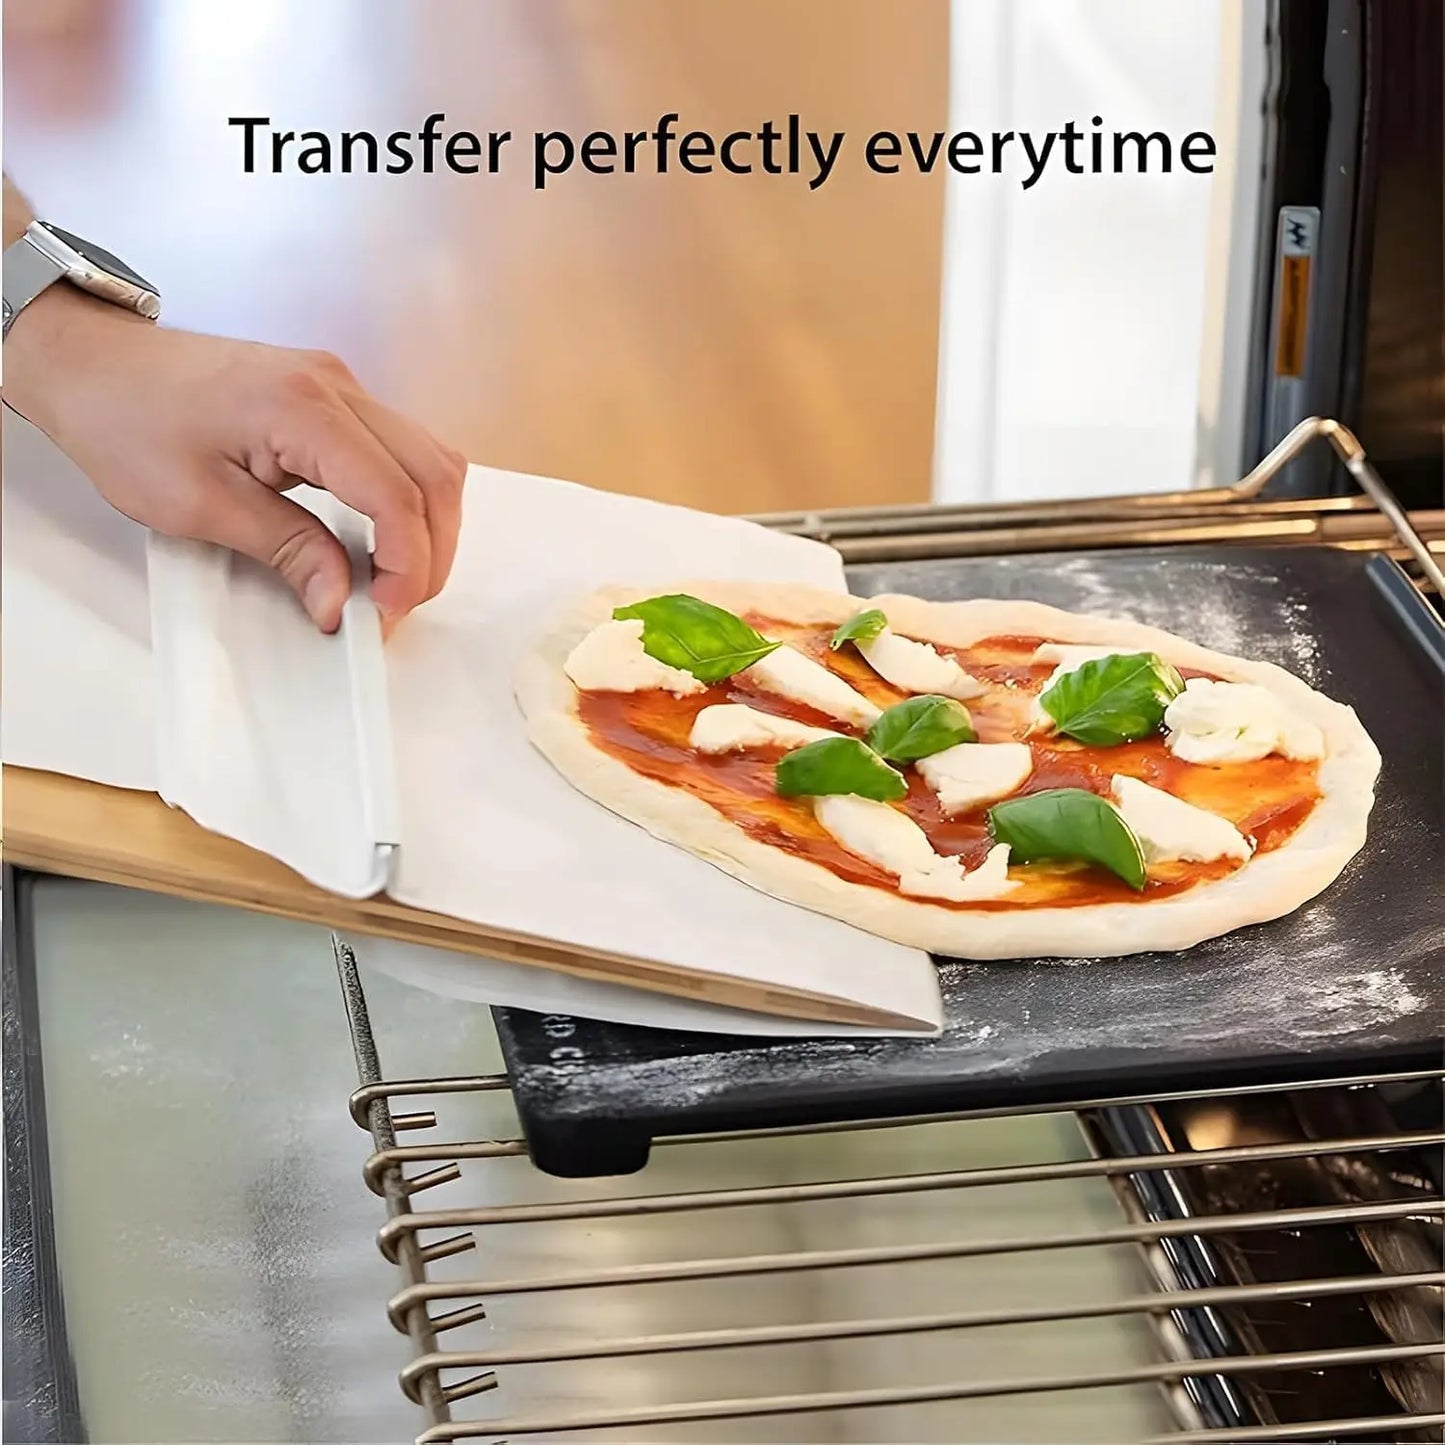 Effortless Pizza Perfection: Our Sliding Pizza Peel!